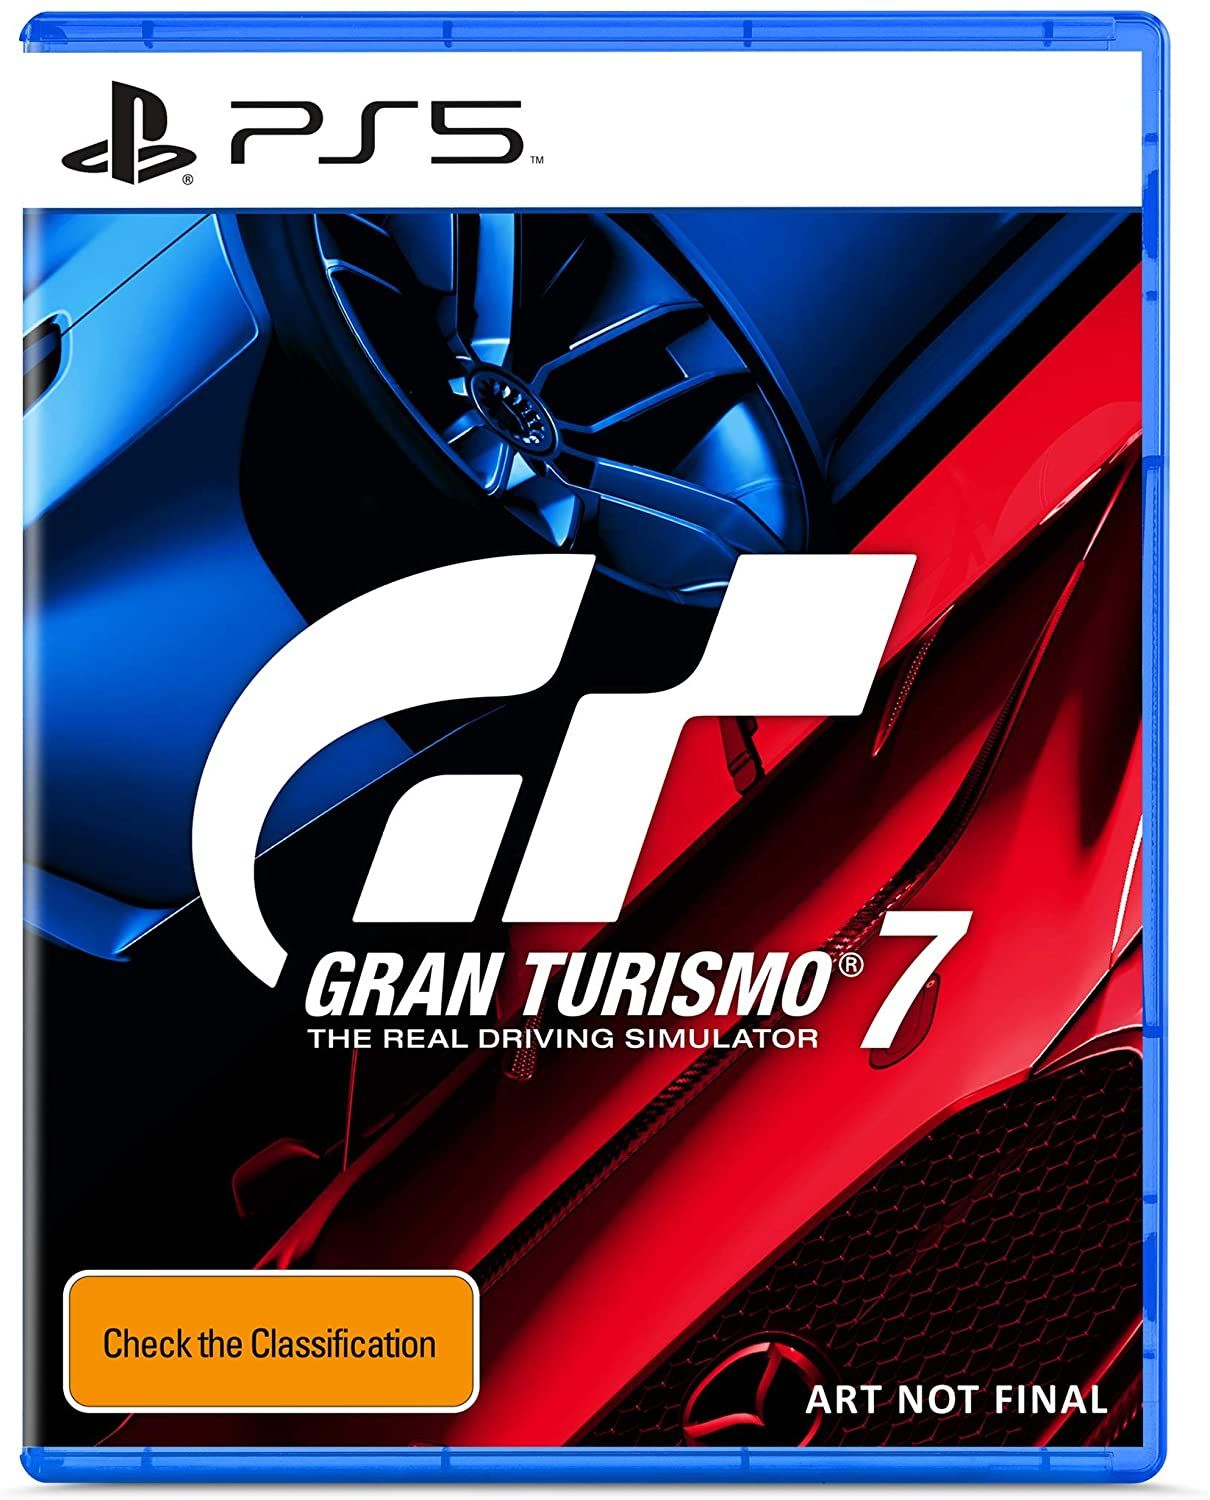 PS5 box art leaked by Amazon